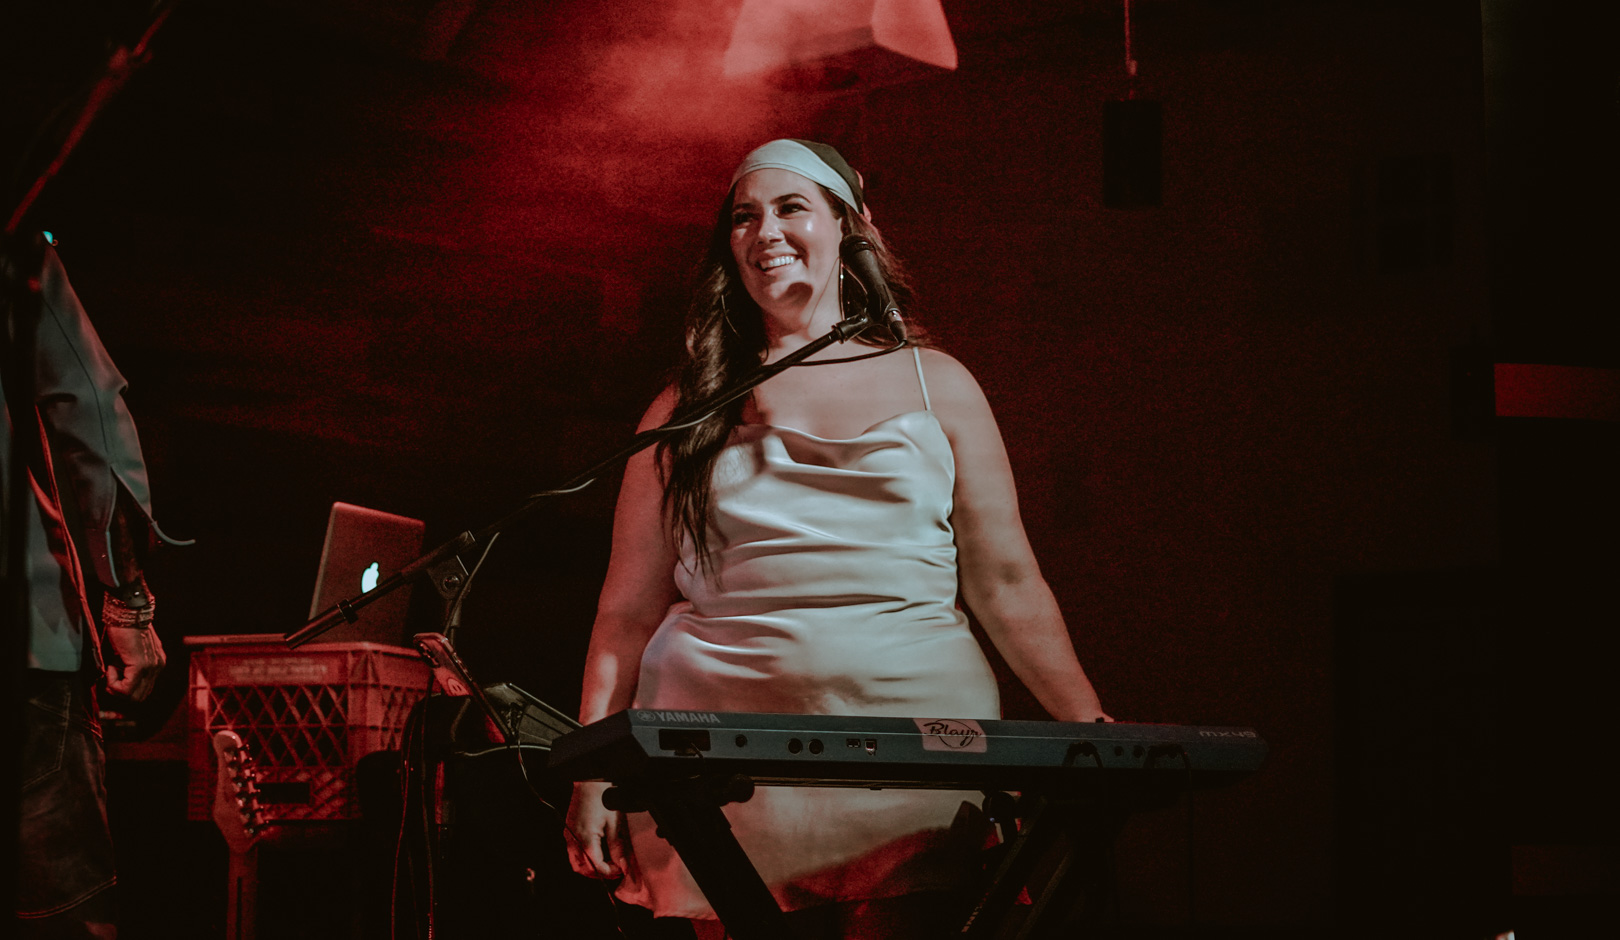 A woman smiling on stage behind a keyboard